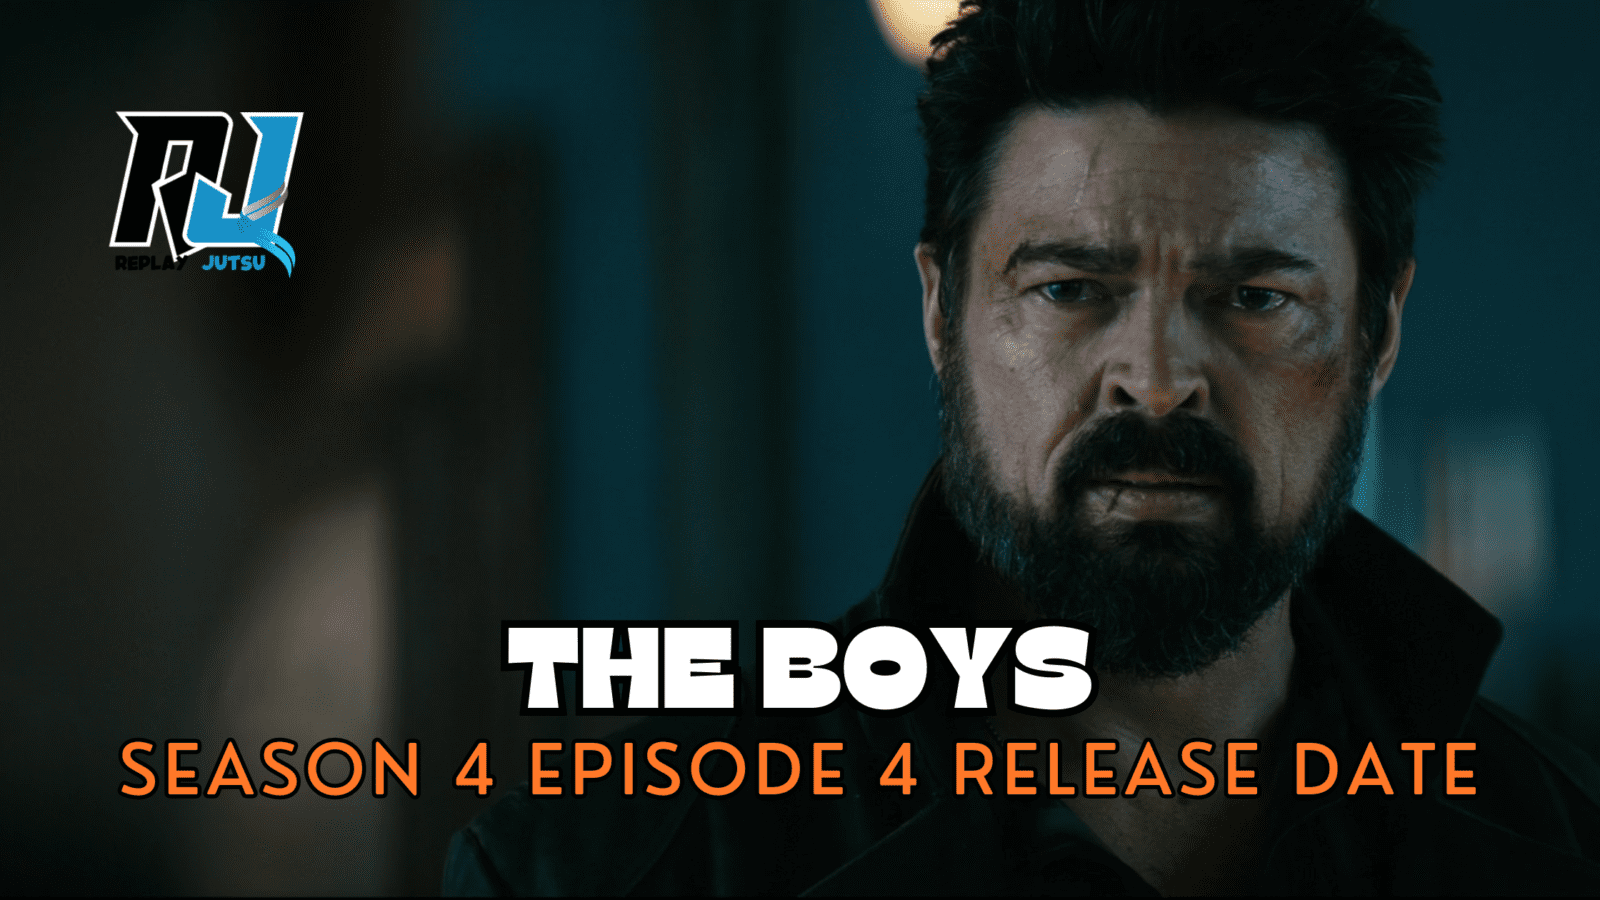 The Boys Season 4 Episode 4 Release Date, Recap, and What To Expect